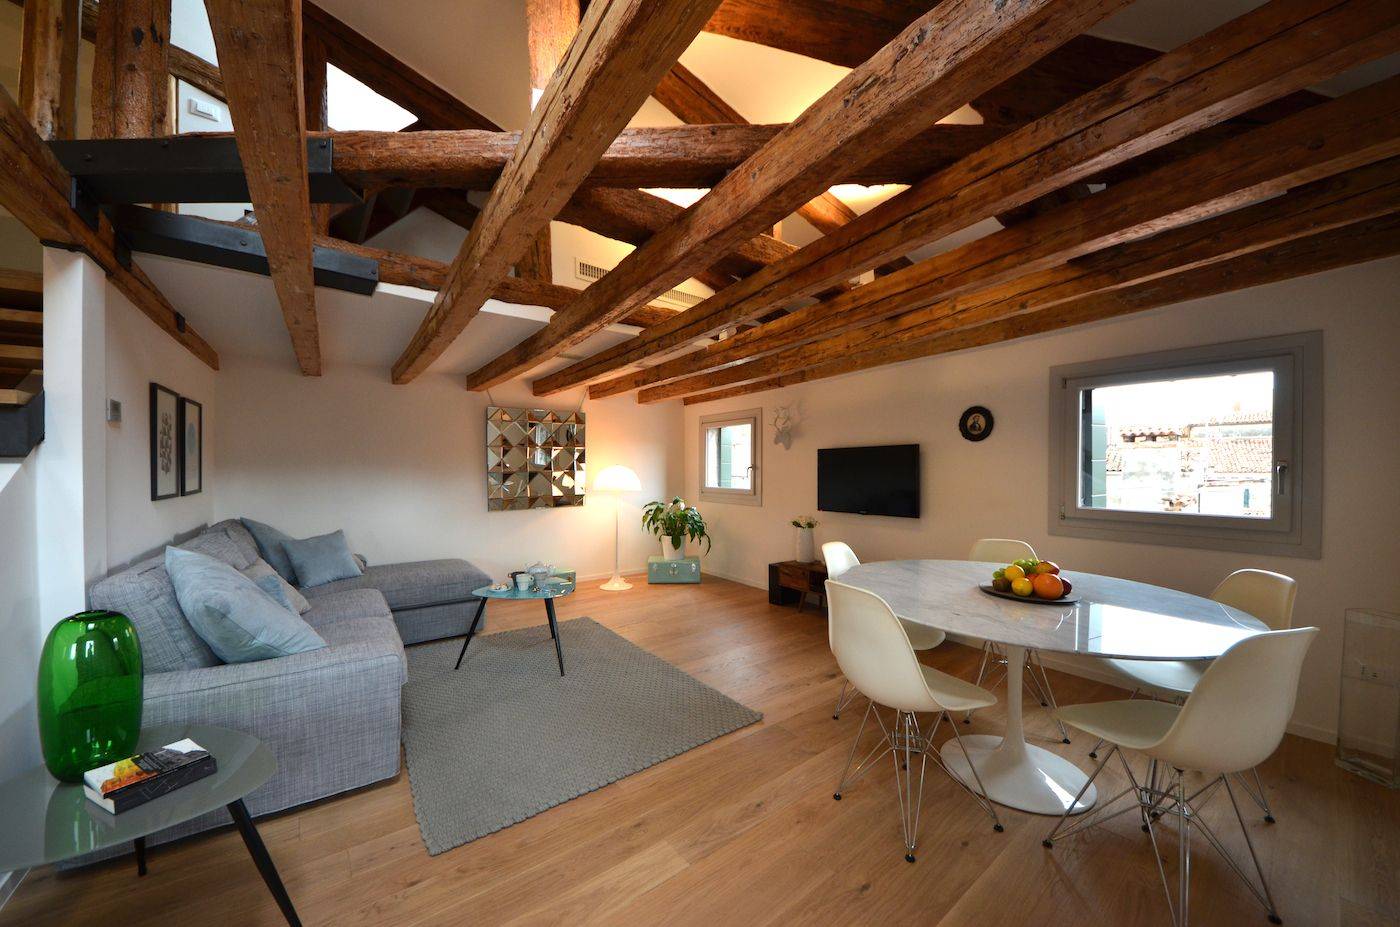 natural parquet flooring and antique wooden beamed ceiling confer warmth to the ambience